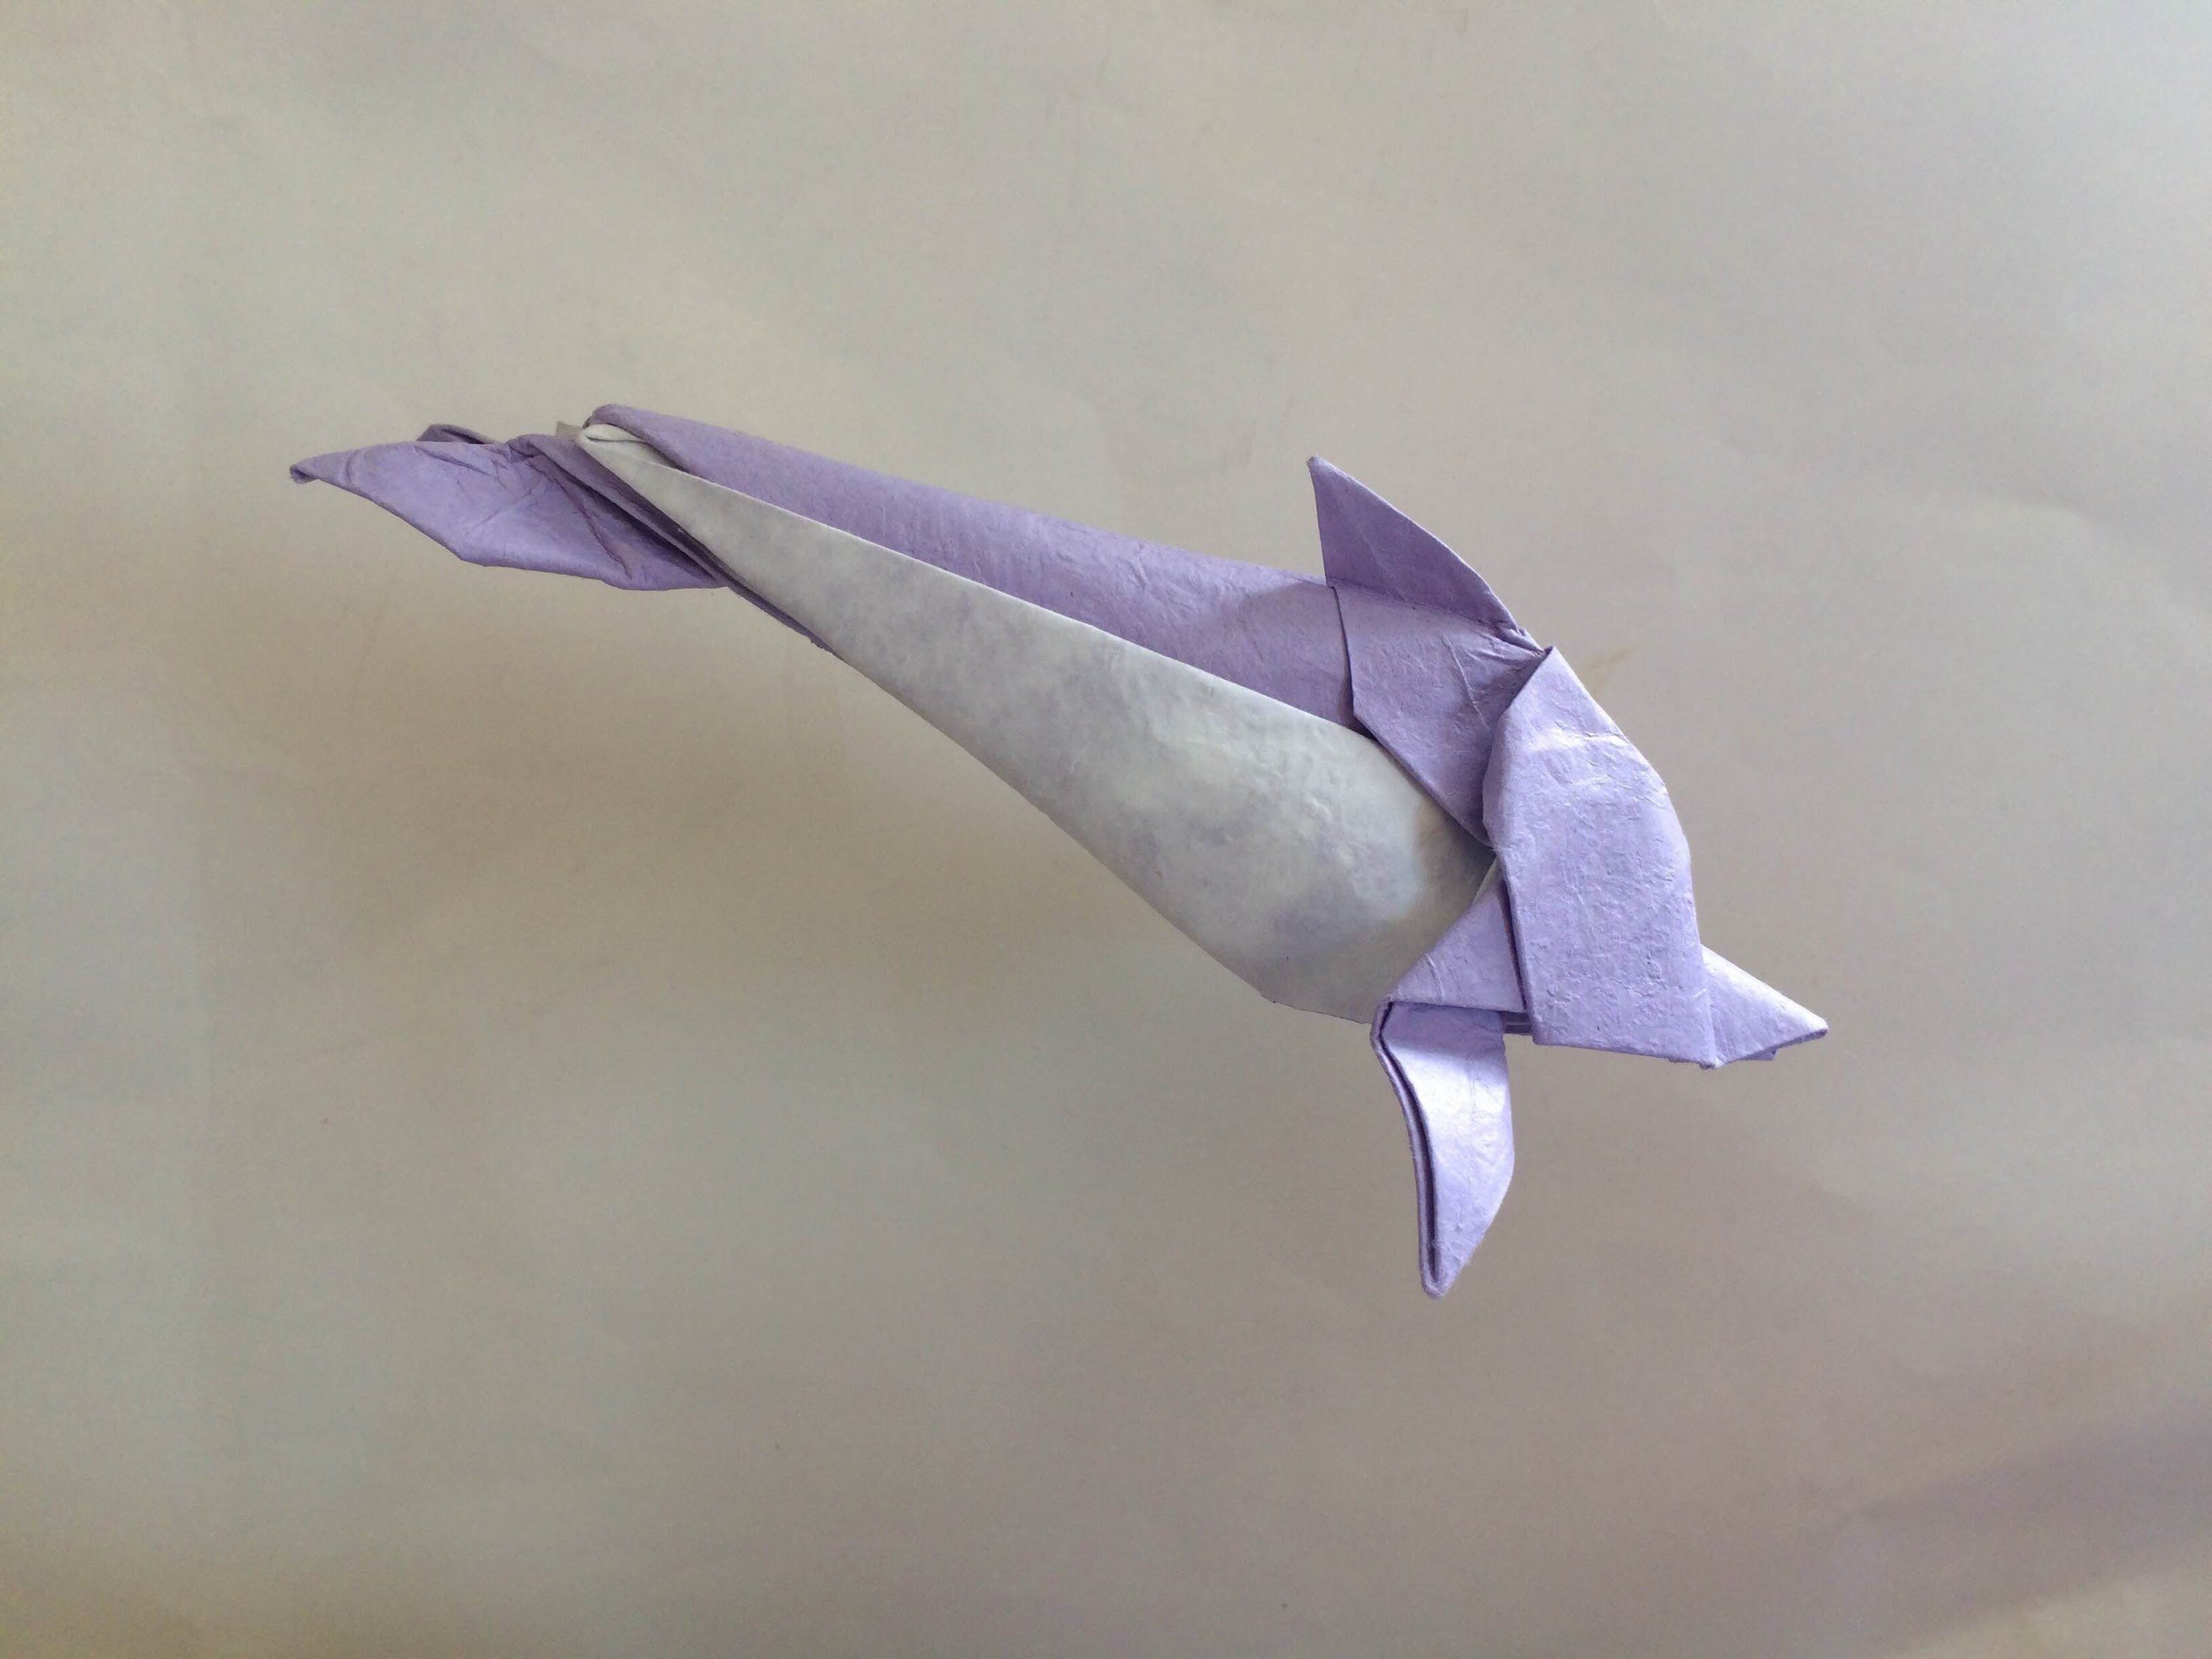 Dolphin Papercraft Tutorial How to Make origami Dolphin by Paperph2